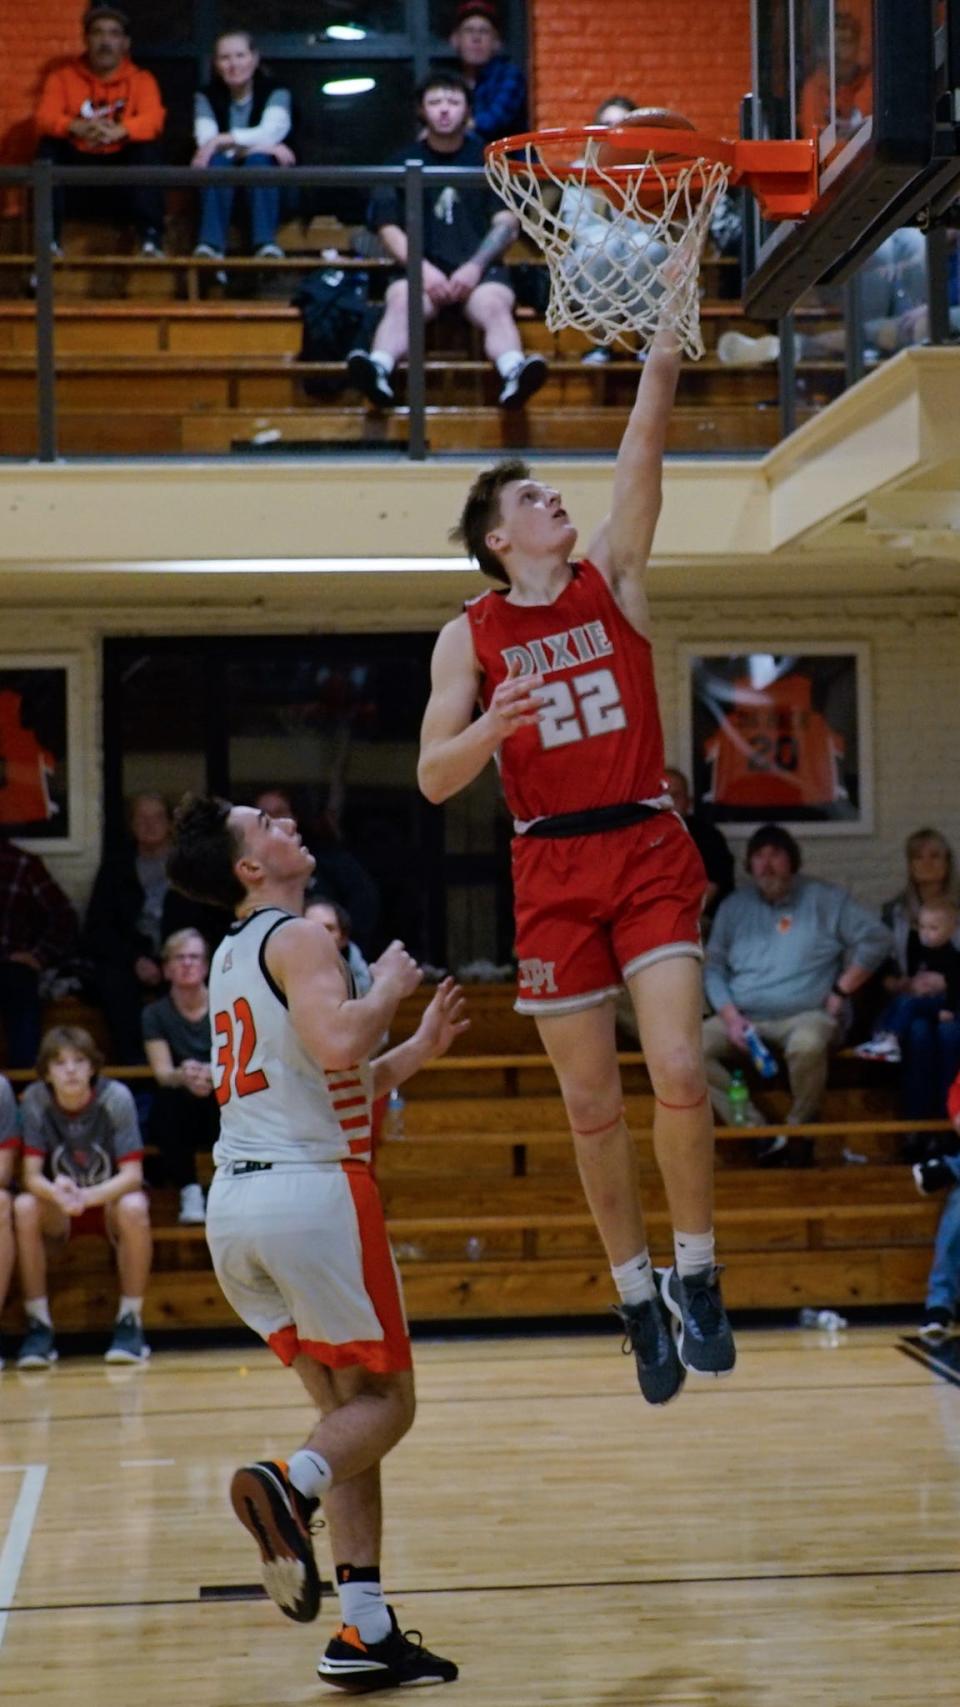 Dixie Heights Hudson Blank (22) scored 48 points in two games to cross the 1,000 point barrier.